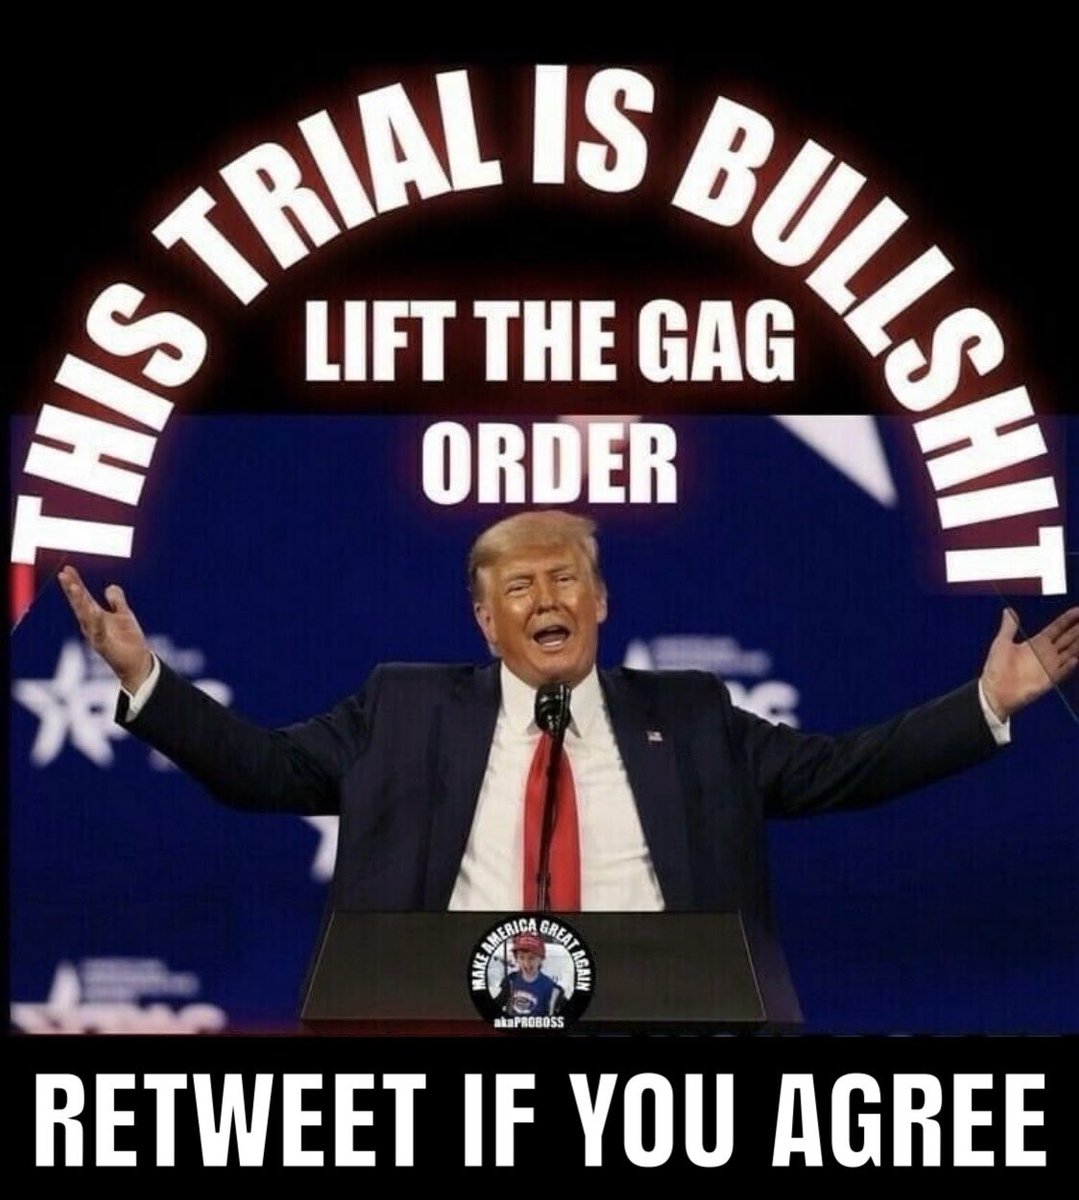 The trial is BS! ♦️Lift the gag order! ♦️ Retweet if you agree!